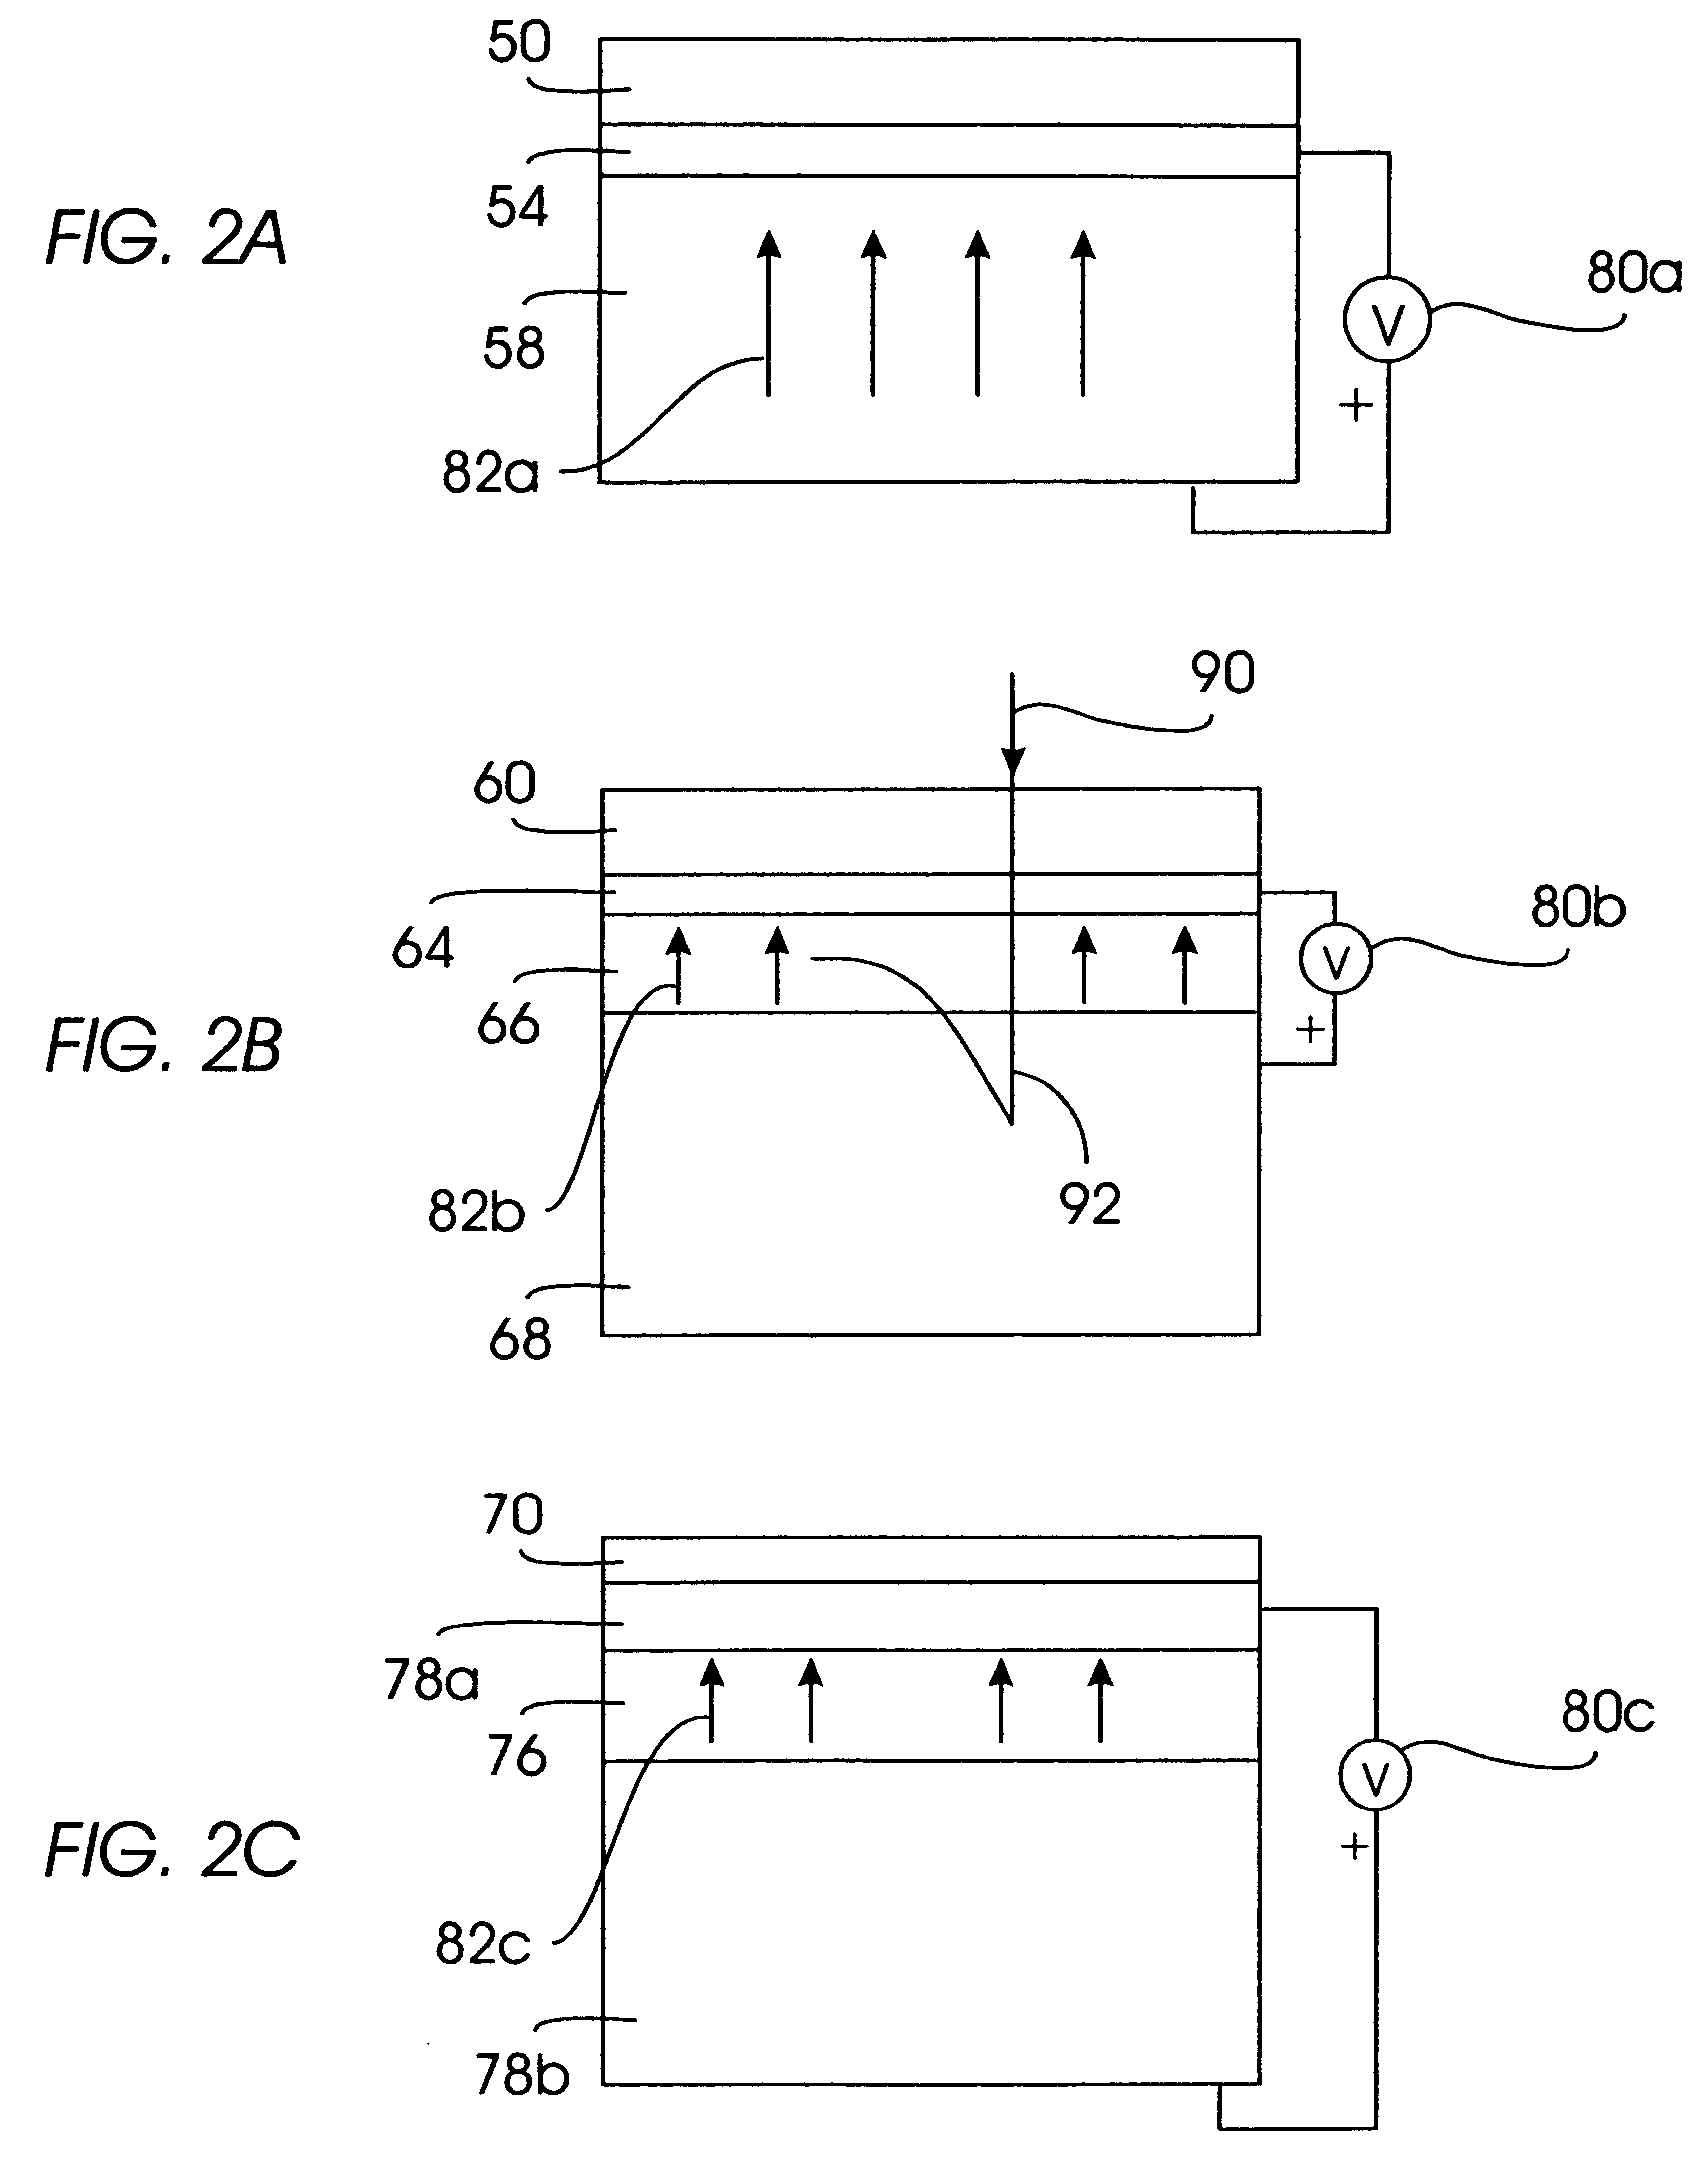 Method for reducing proximity effects in electron beam lithography